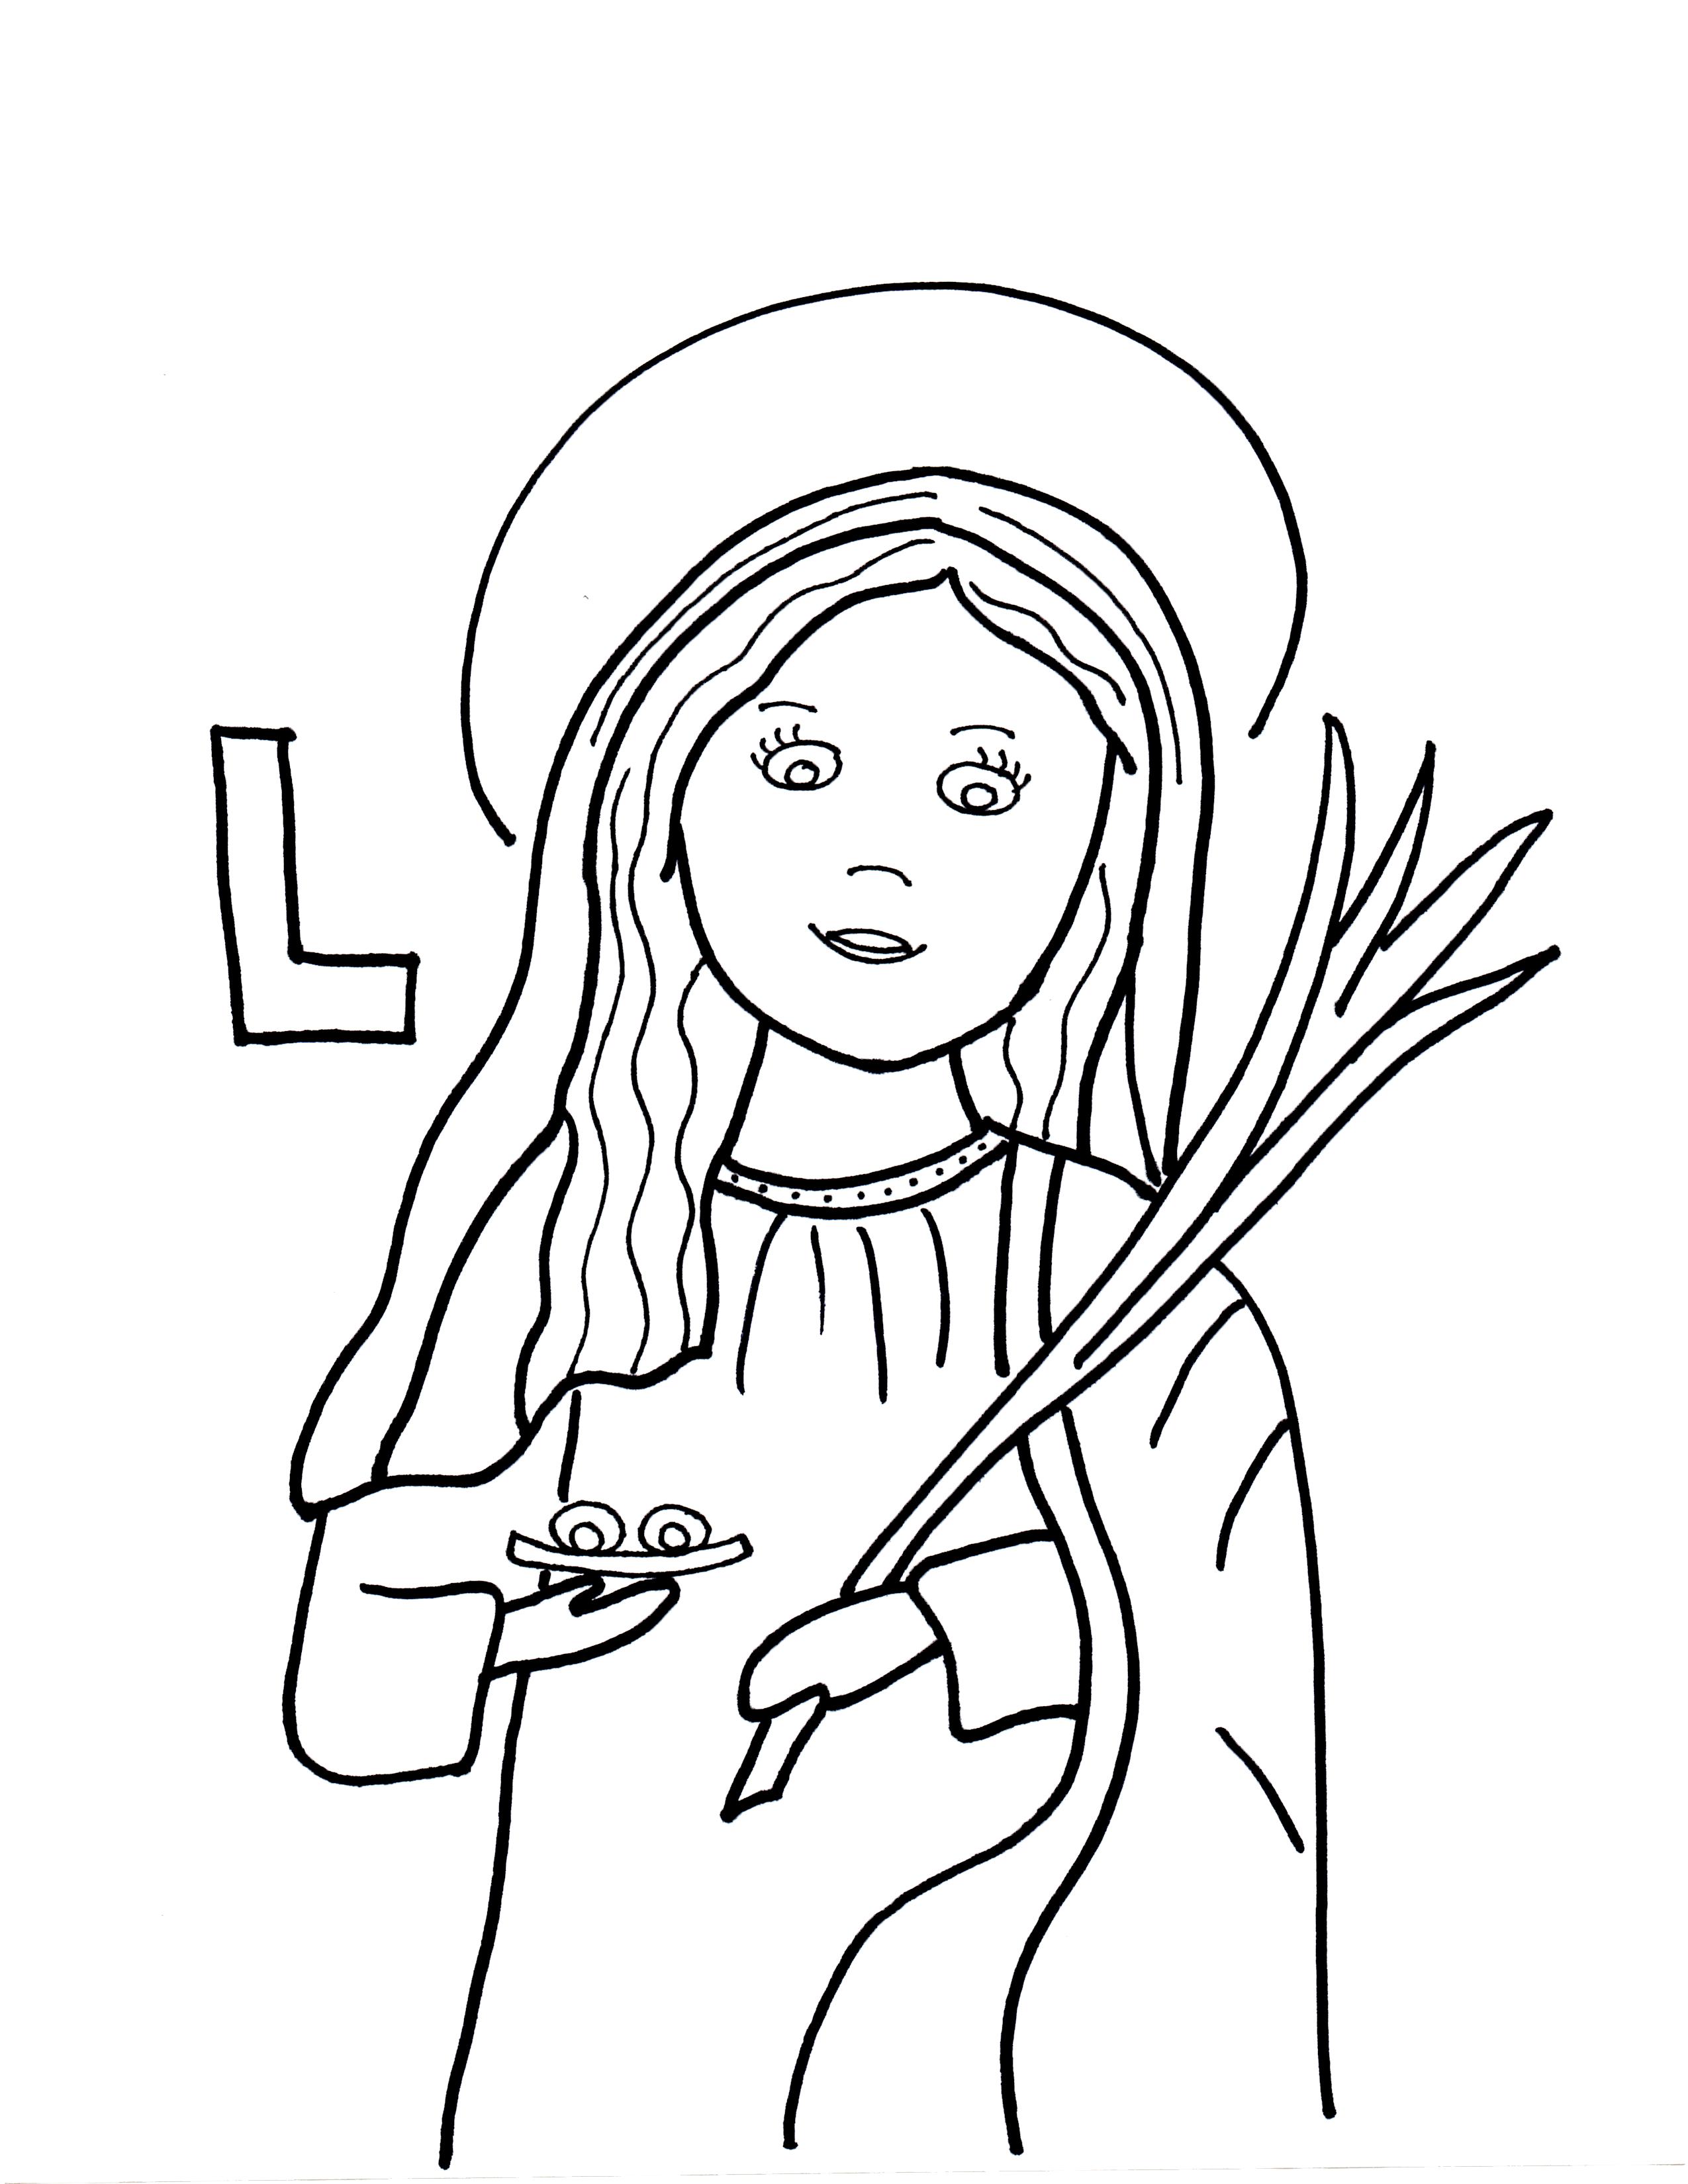 L is for St. Lucy | Saints to Color